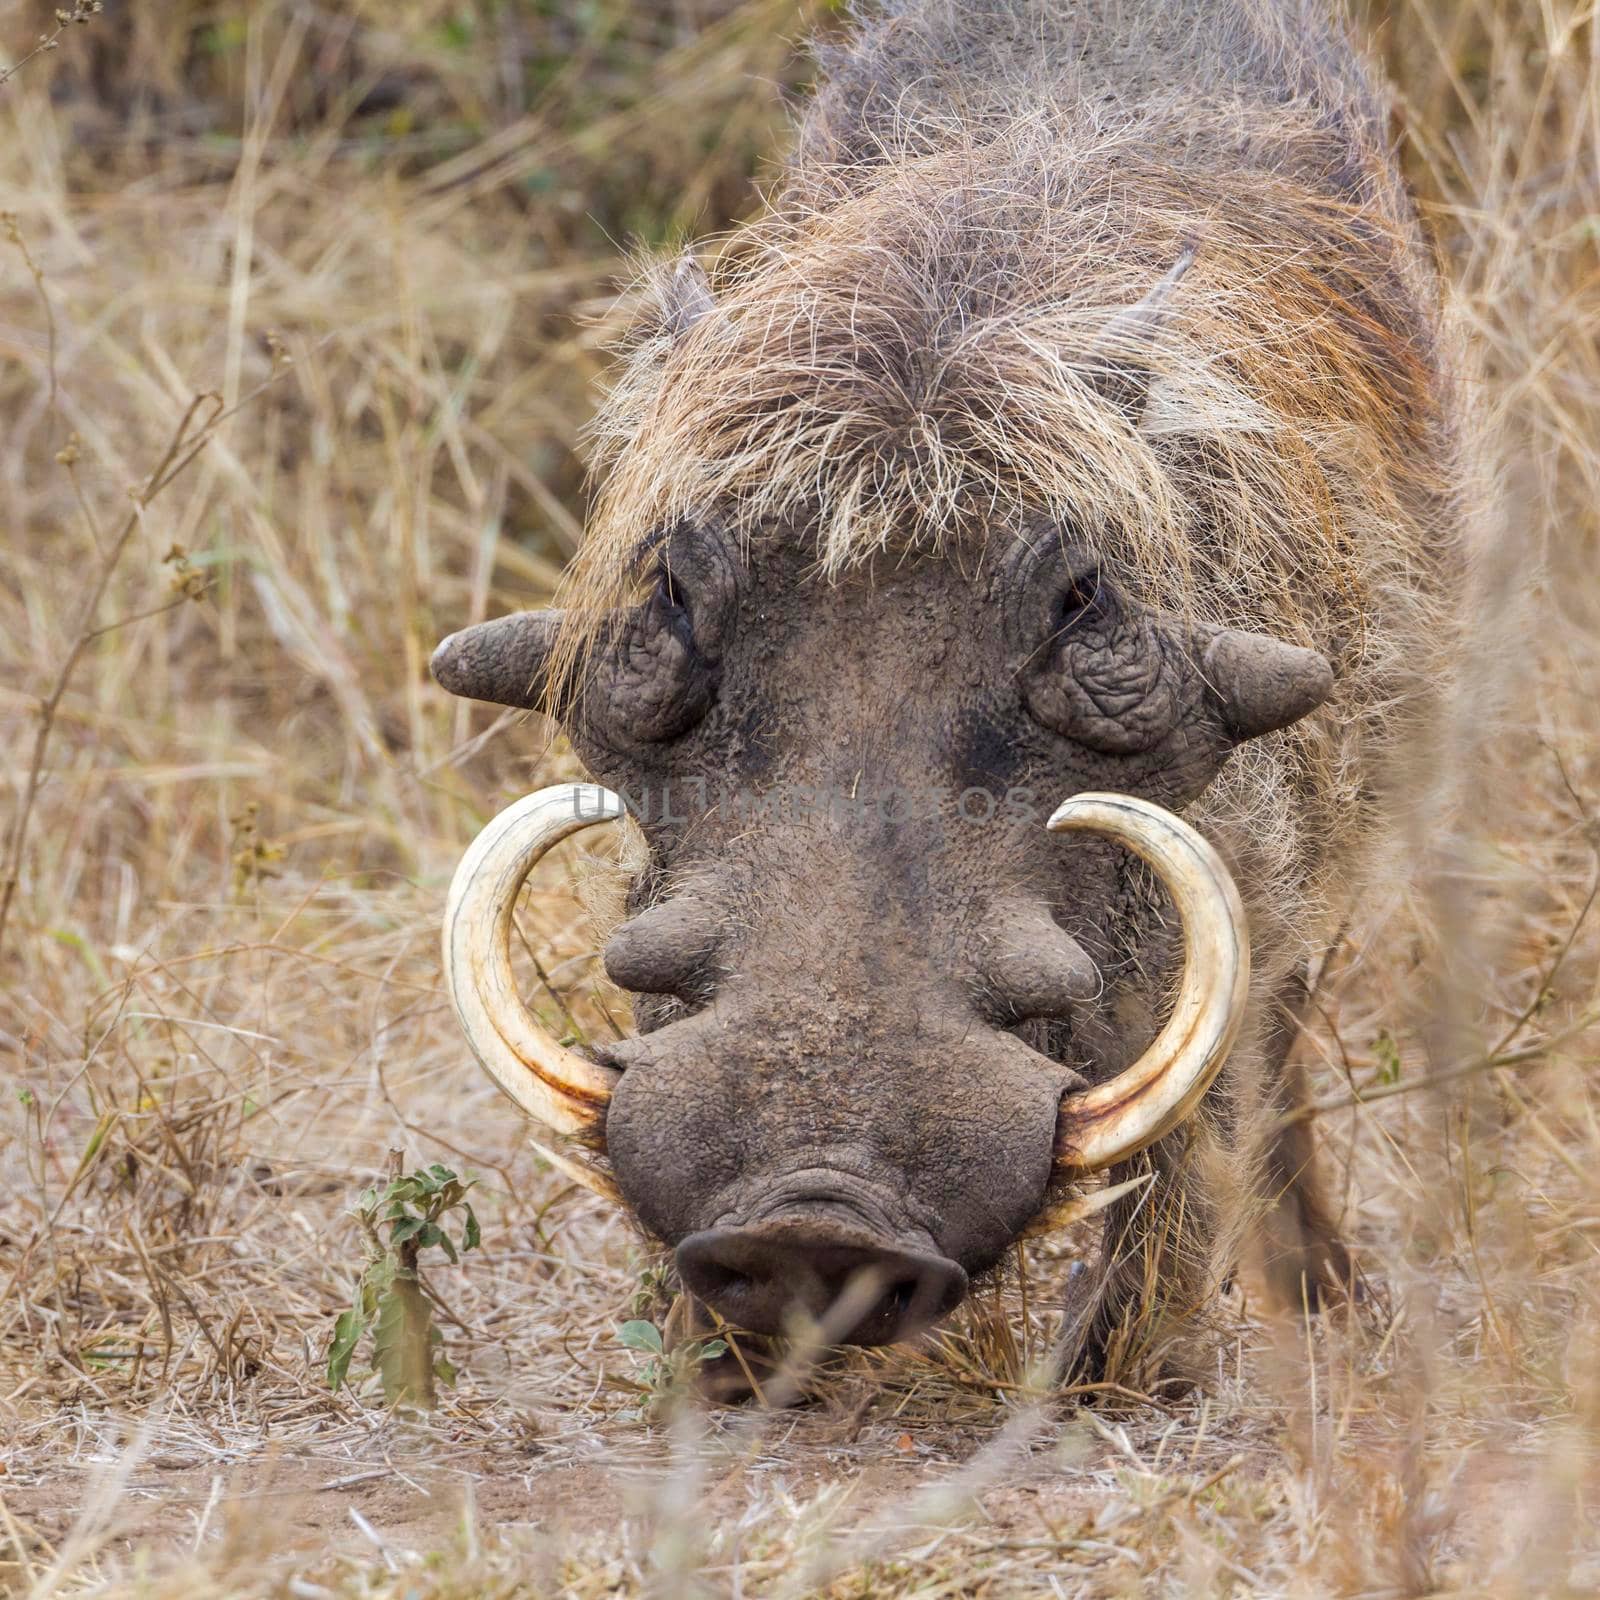 common warthog in Kruger National park, South Africa ; Specie Phacochoerus africanus family of Suidae